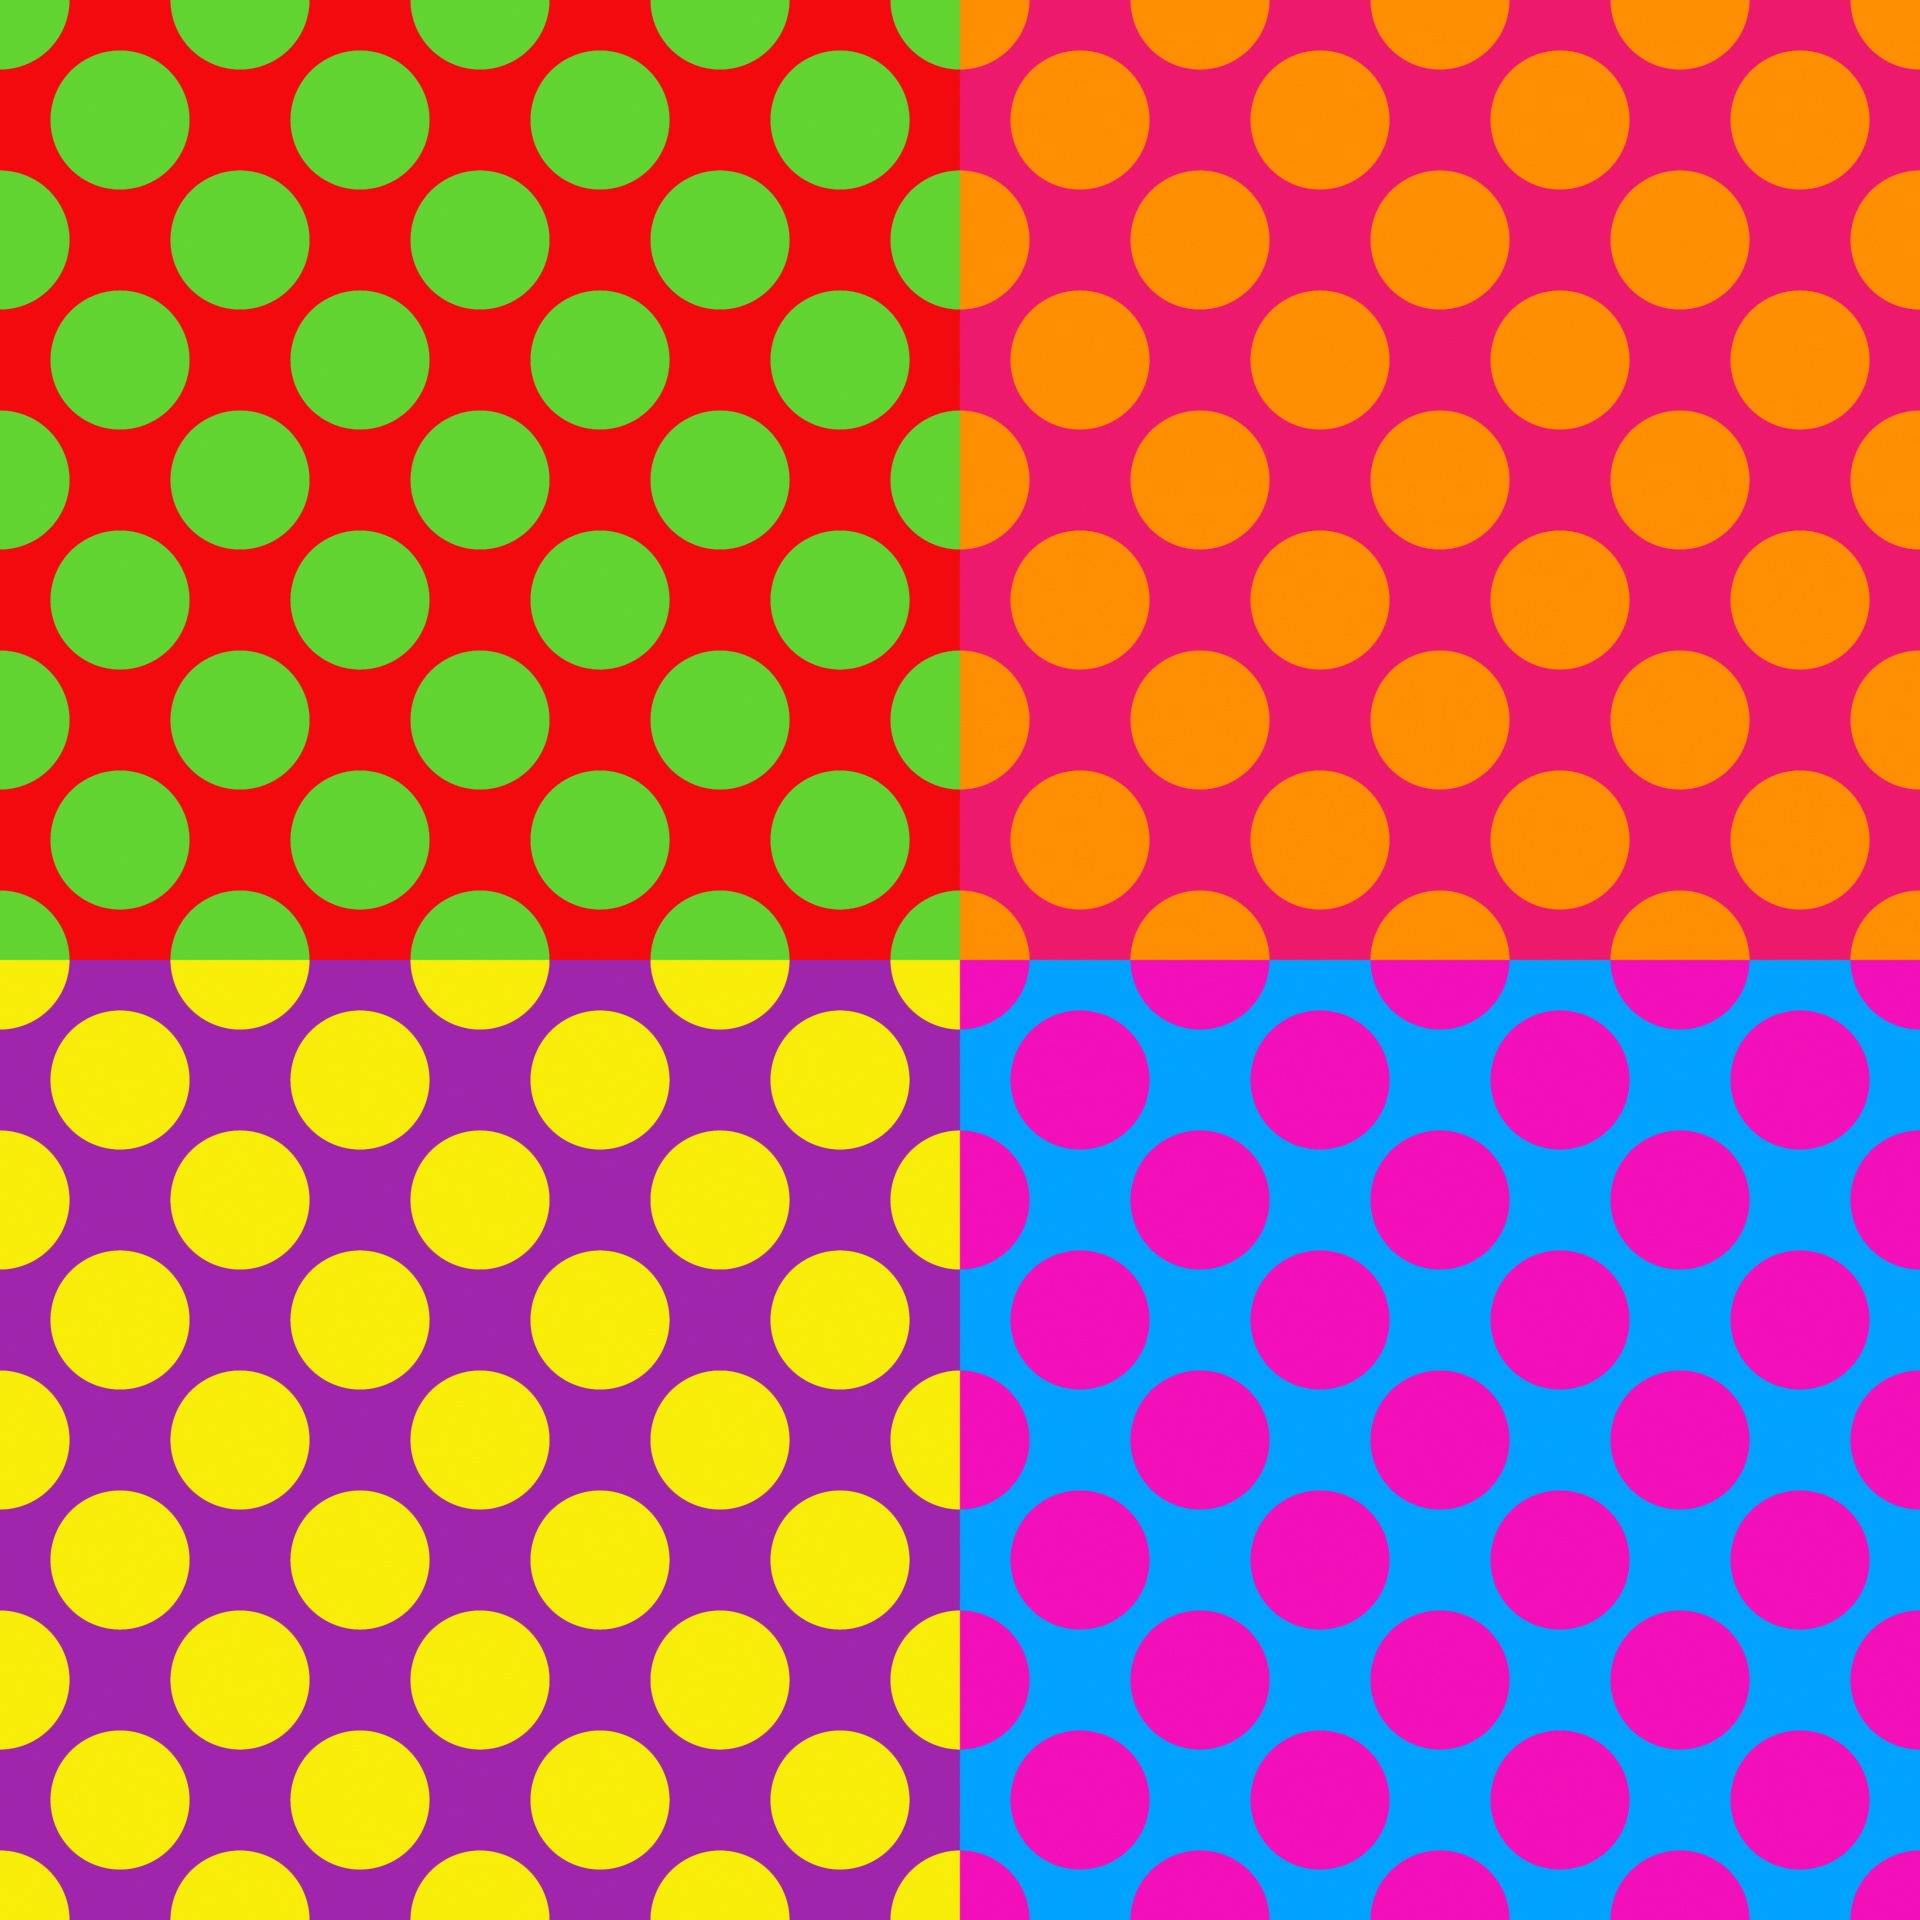 A completely seamless repeating pattern.